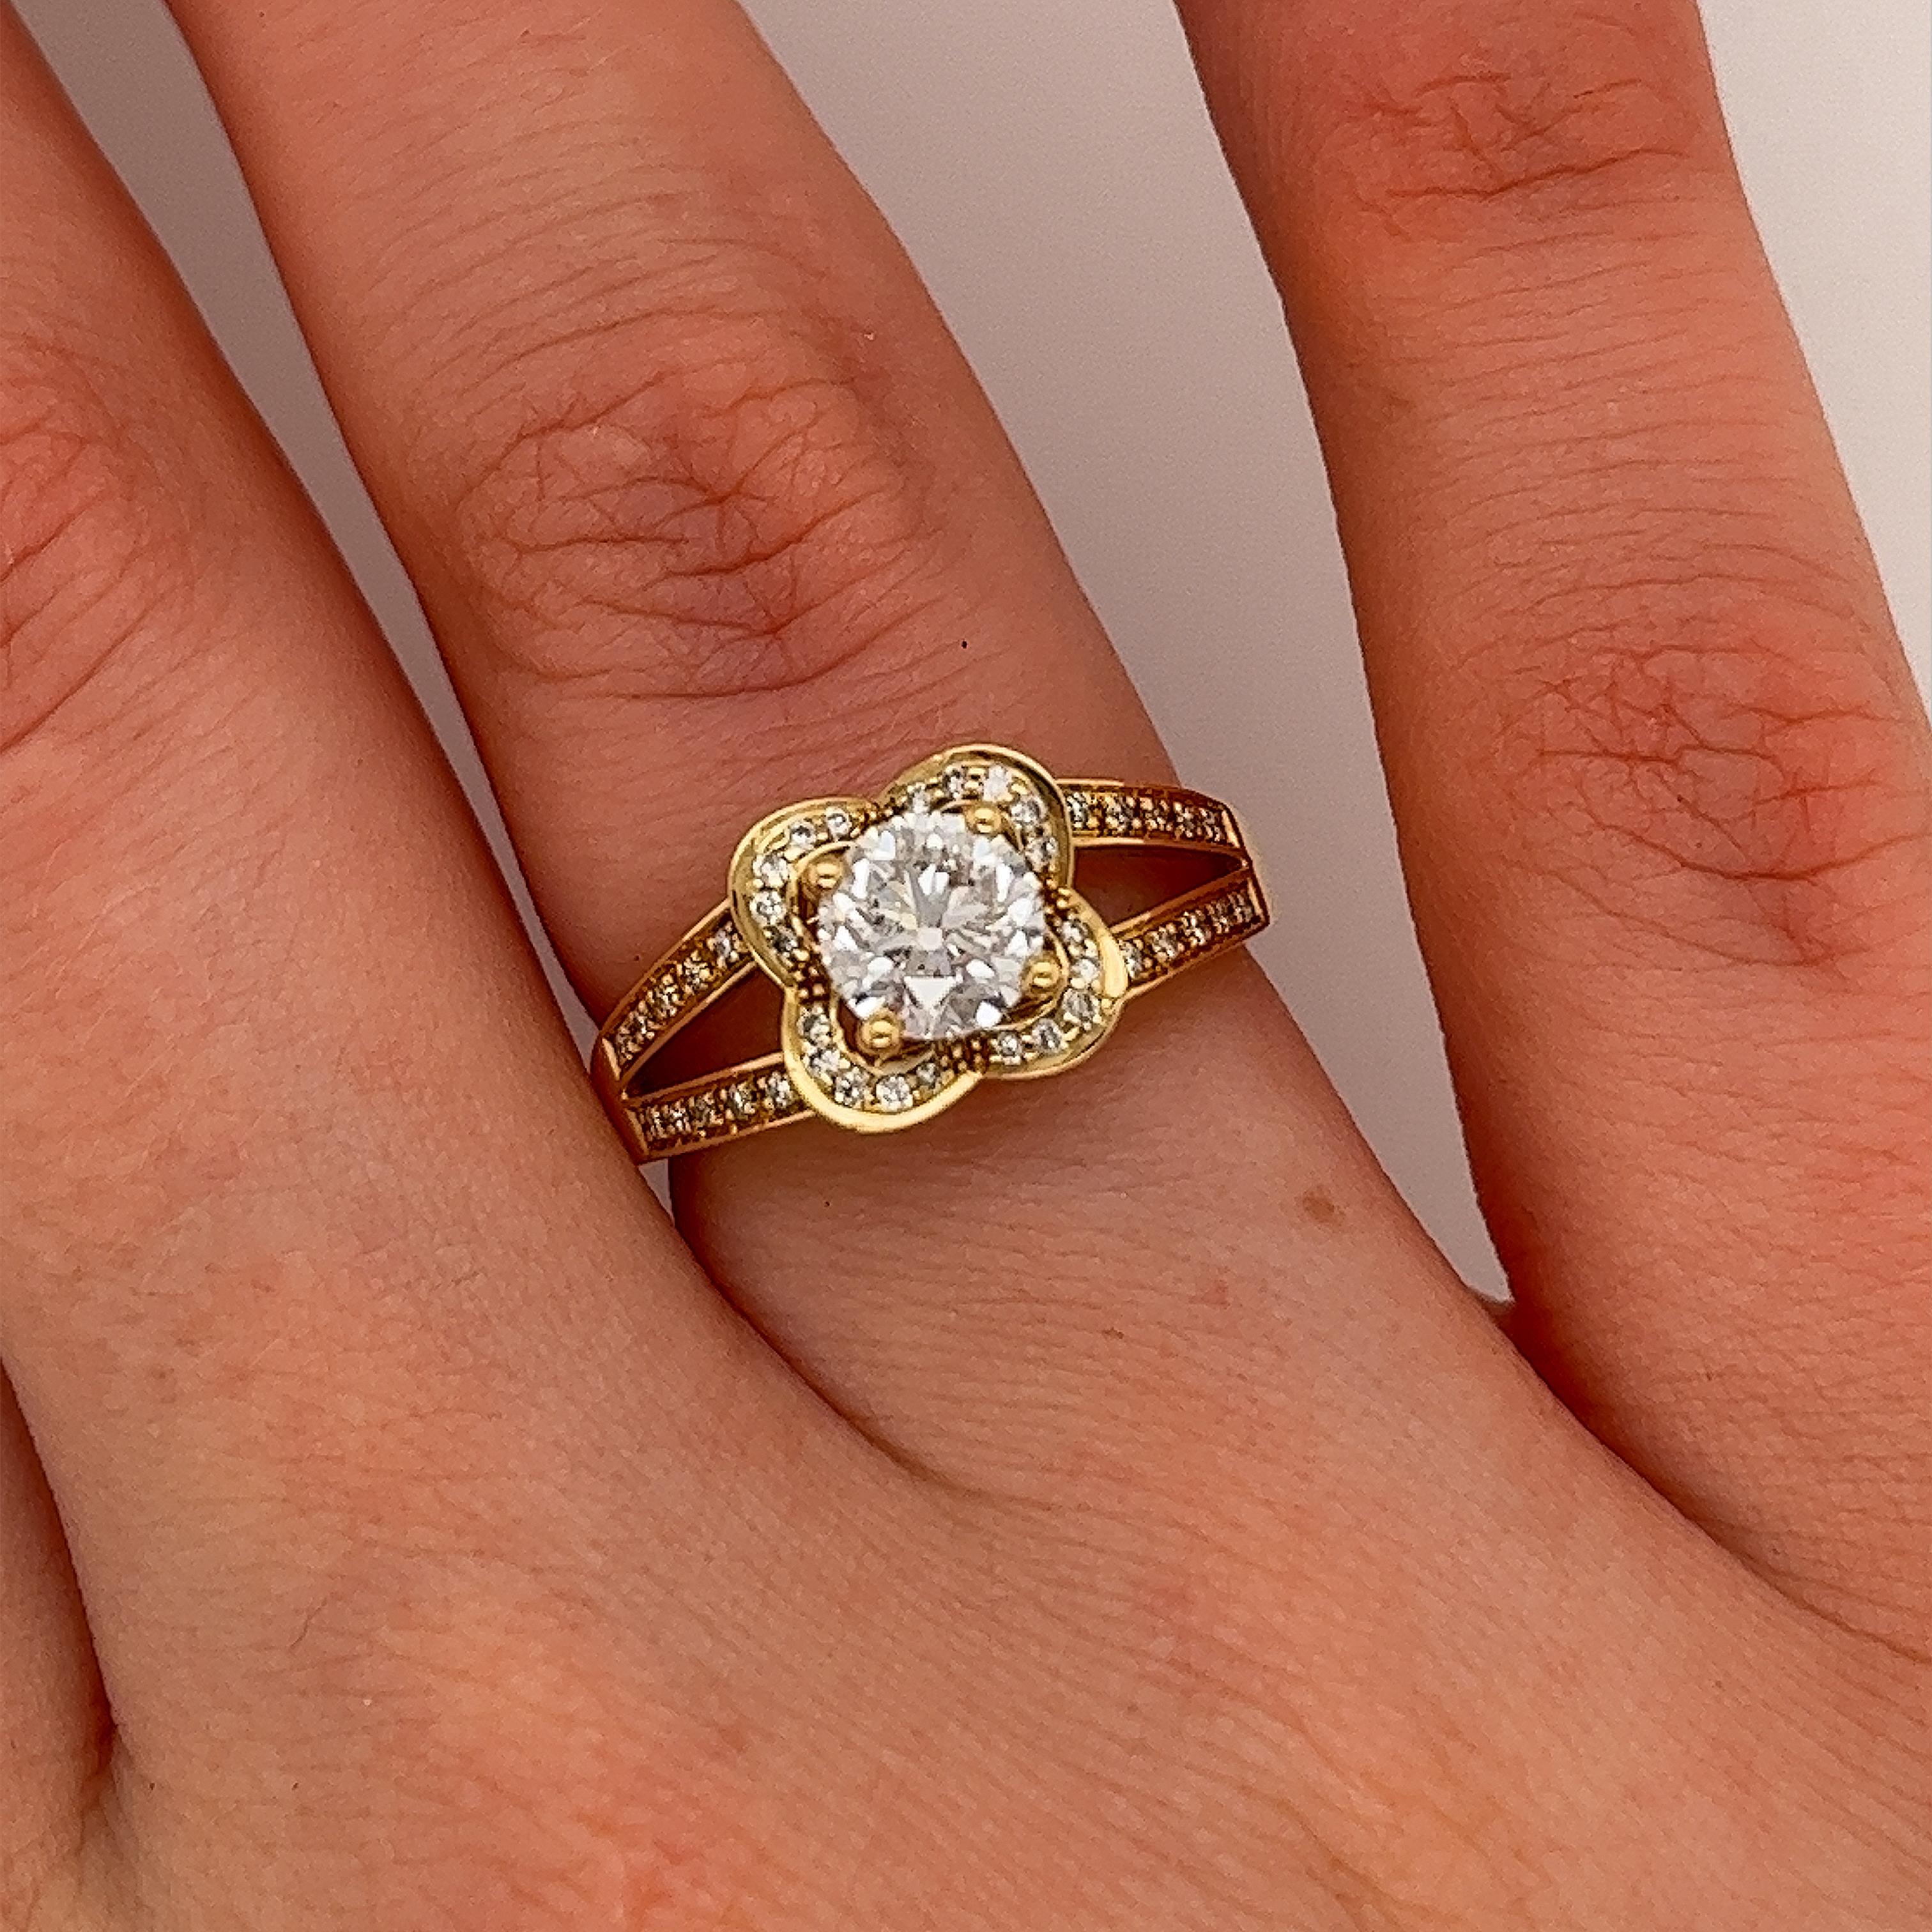 Mauboussin 18ct Yellow Gold Diamond Ring, Set With 0.90ct Gia D/VS1 Diamond In Excellent Condition For Sale In London, GB